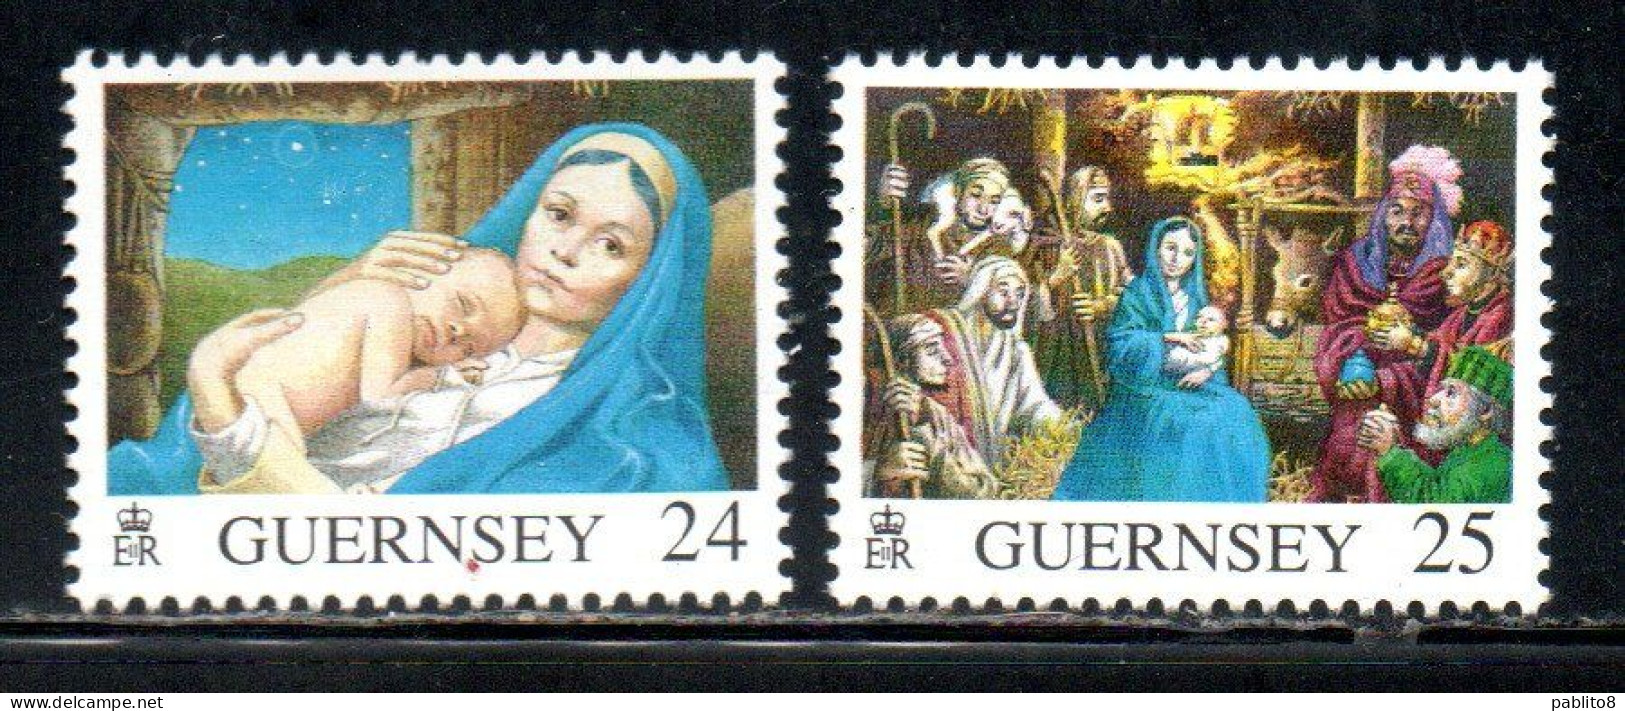 GUERNSEY GUERNESEY 1996 CHRISTMAS NATALE NOEL WEIHNACHTEN NAVIDAD NATAL COMPLETE SET SERIE COMPLETA MNH - Guernesey